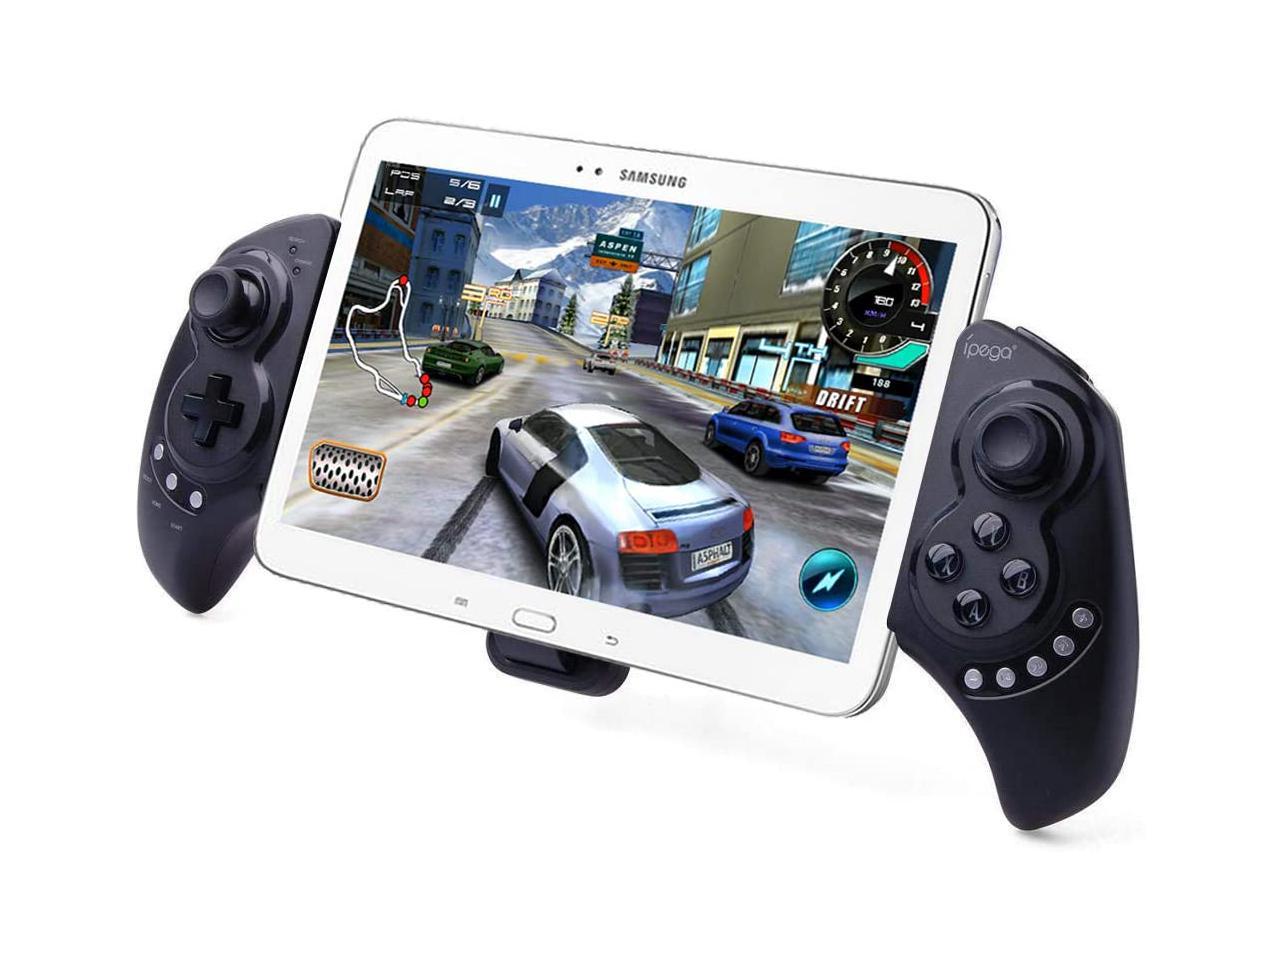 Brood alliantie Welvarend Wireless Gamepad Game Controller, Telescopic Extendable Joystick for 5-10  inch Tablets Phones, Compatible with PC, Android, Samsung Galaxy Tab S3 S2  Note 9 Galaxy S10 S9+ S8+ Huawei - Newegg.com